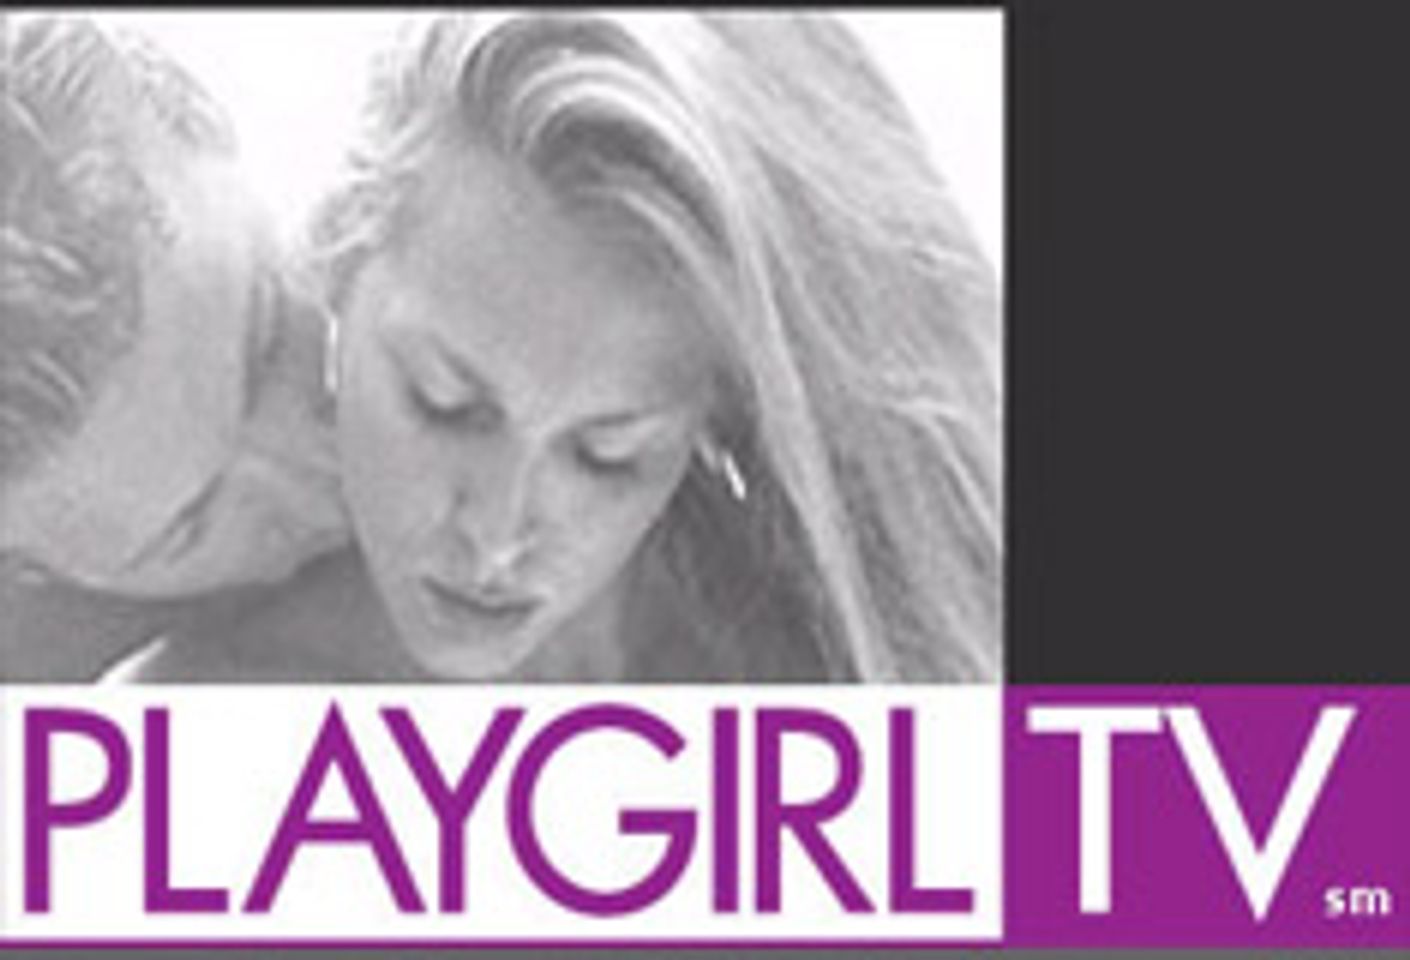 Playgirl TV Launches Podcast on Yahoo